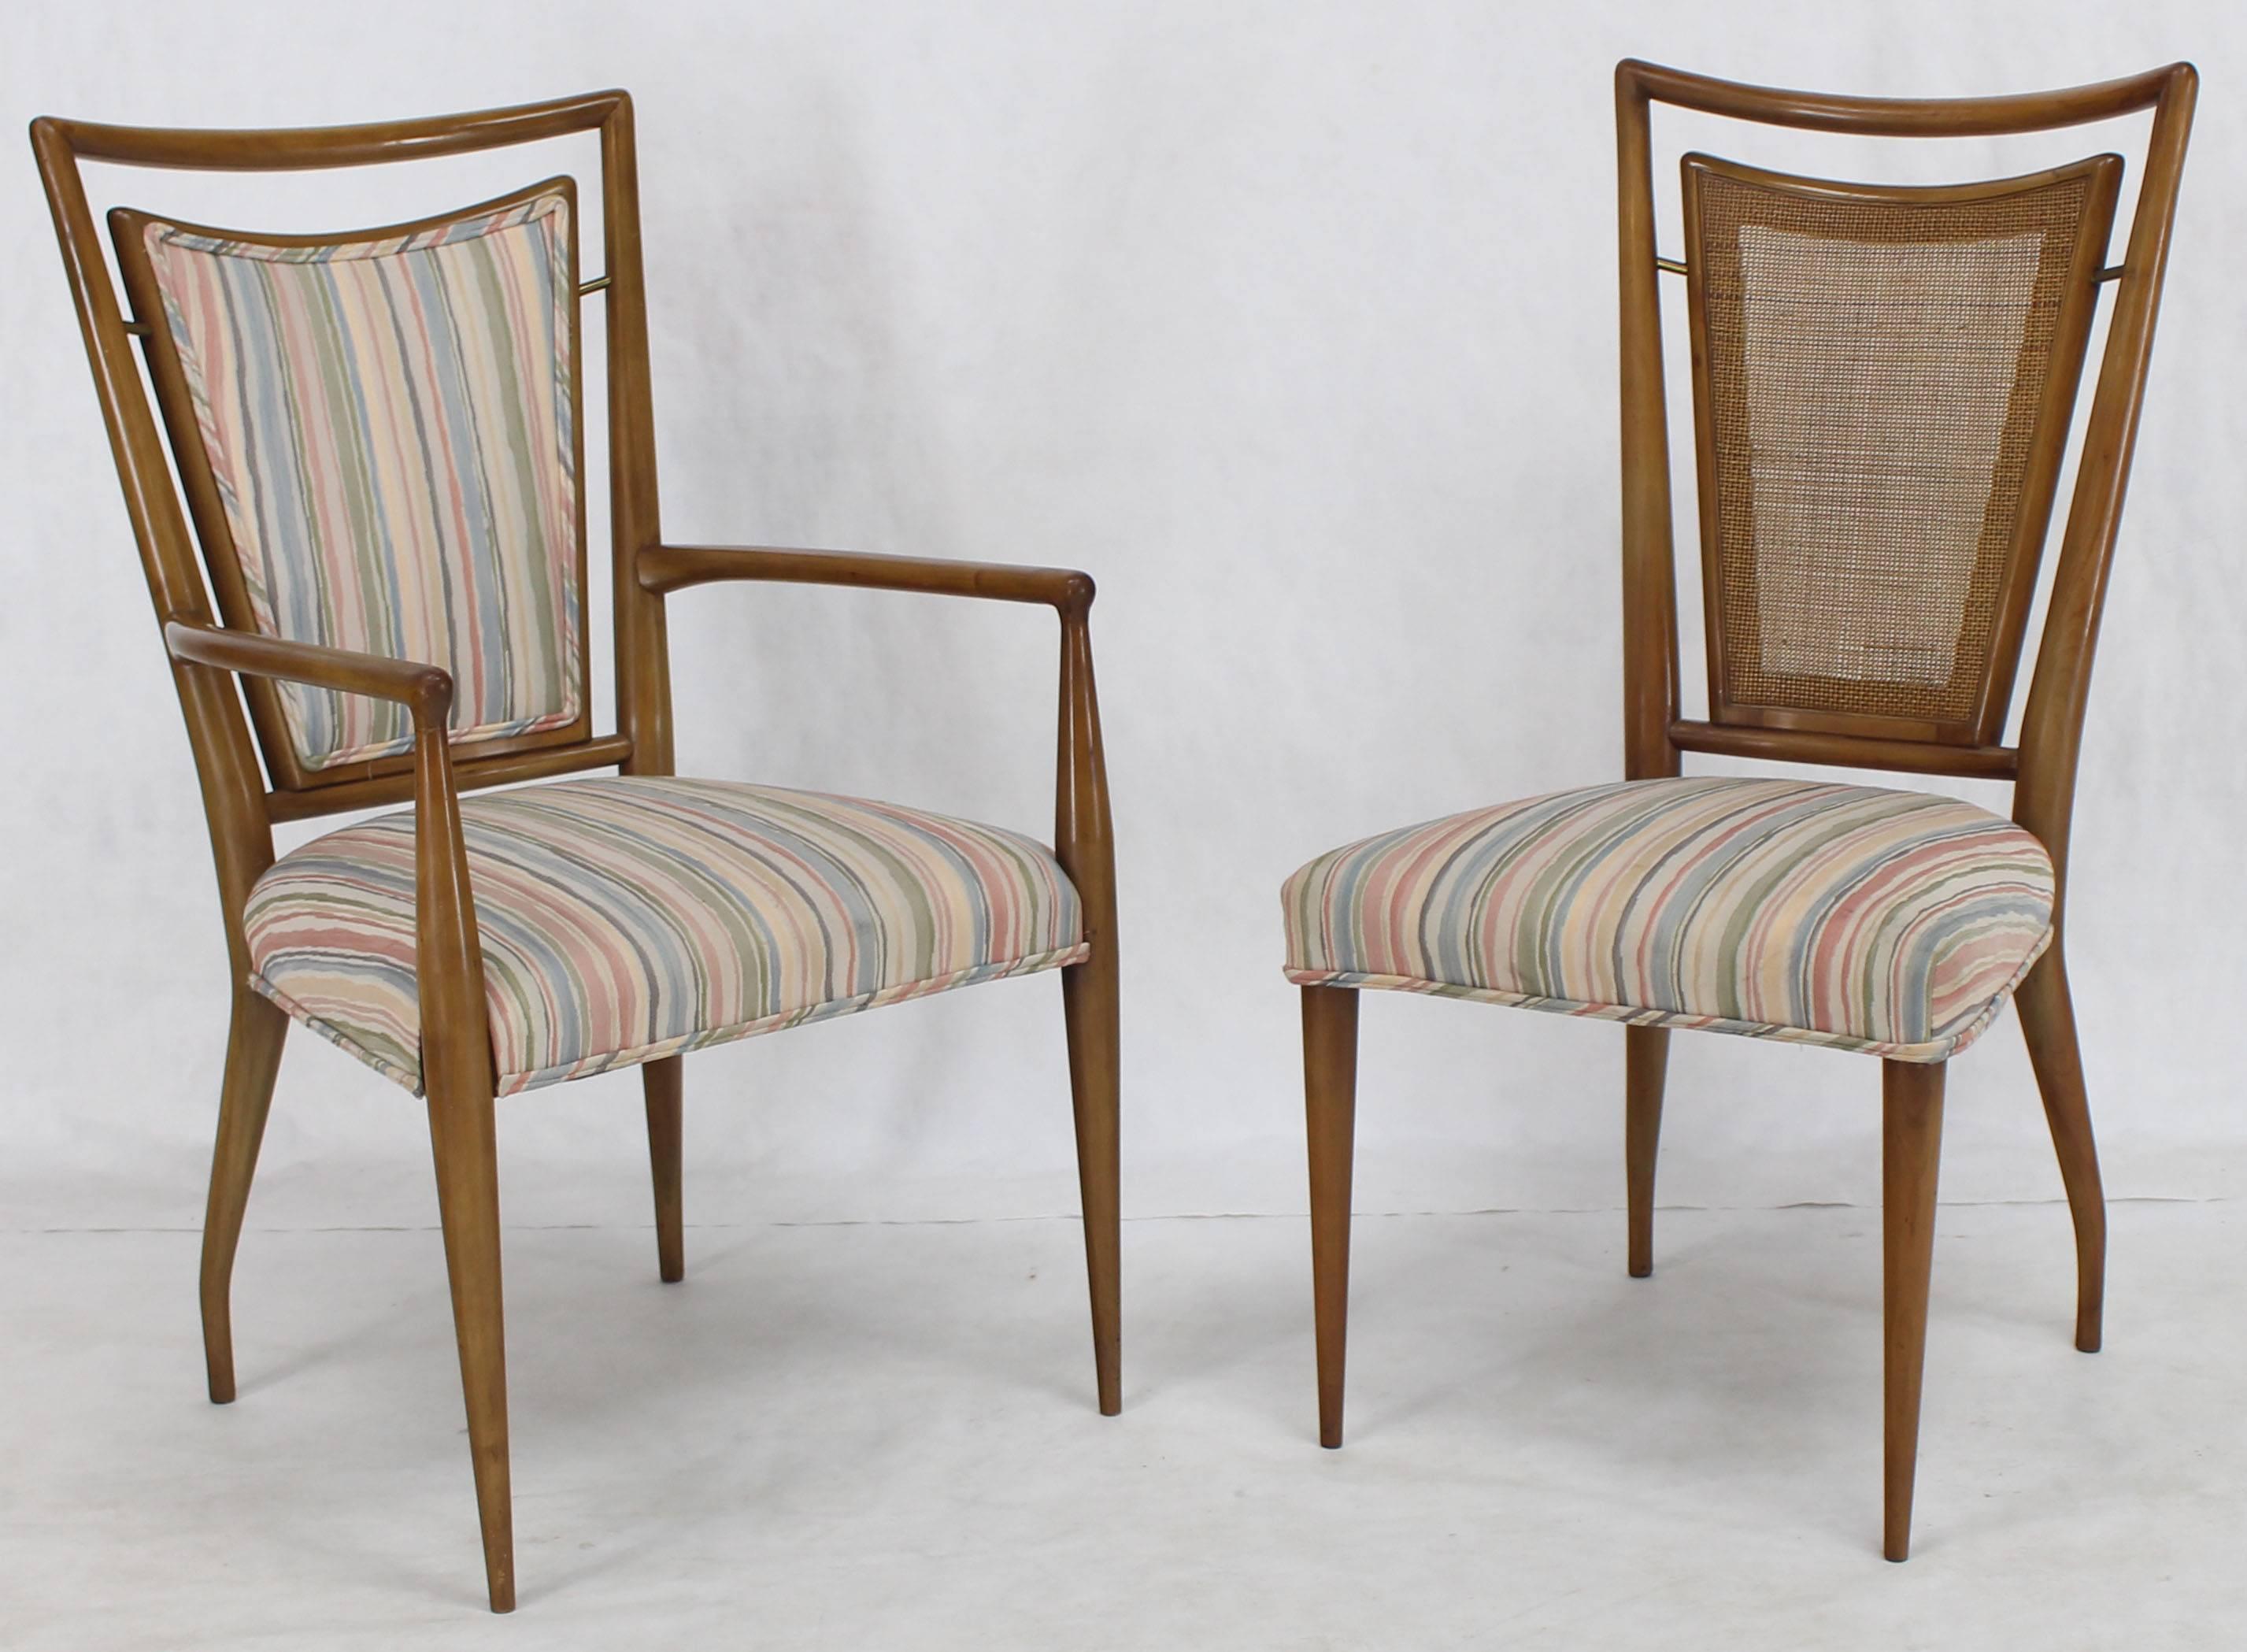 Lacquered Set of Six Mid-Century Modern Walnut Dining Chairs by Widdicomb in Ponti Style For Sale